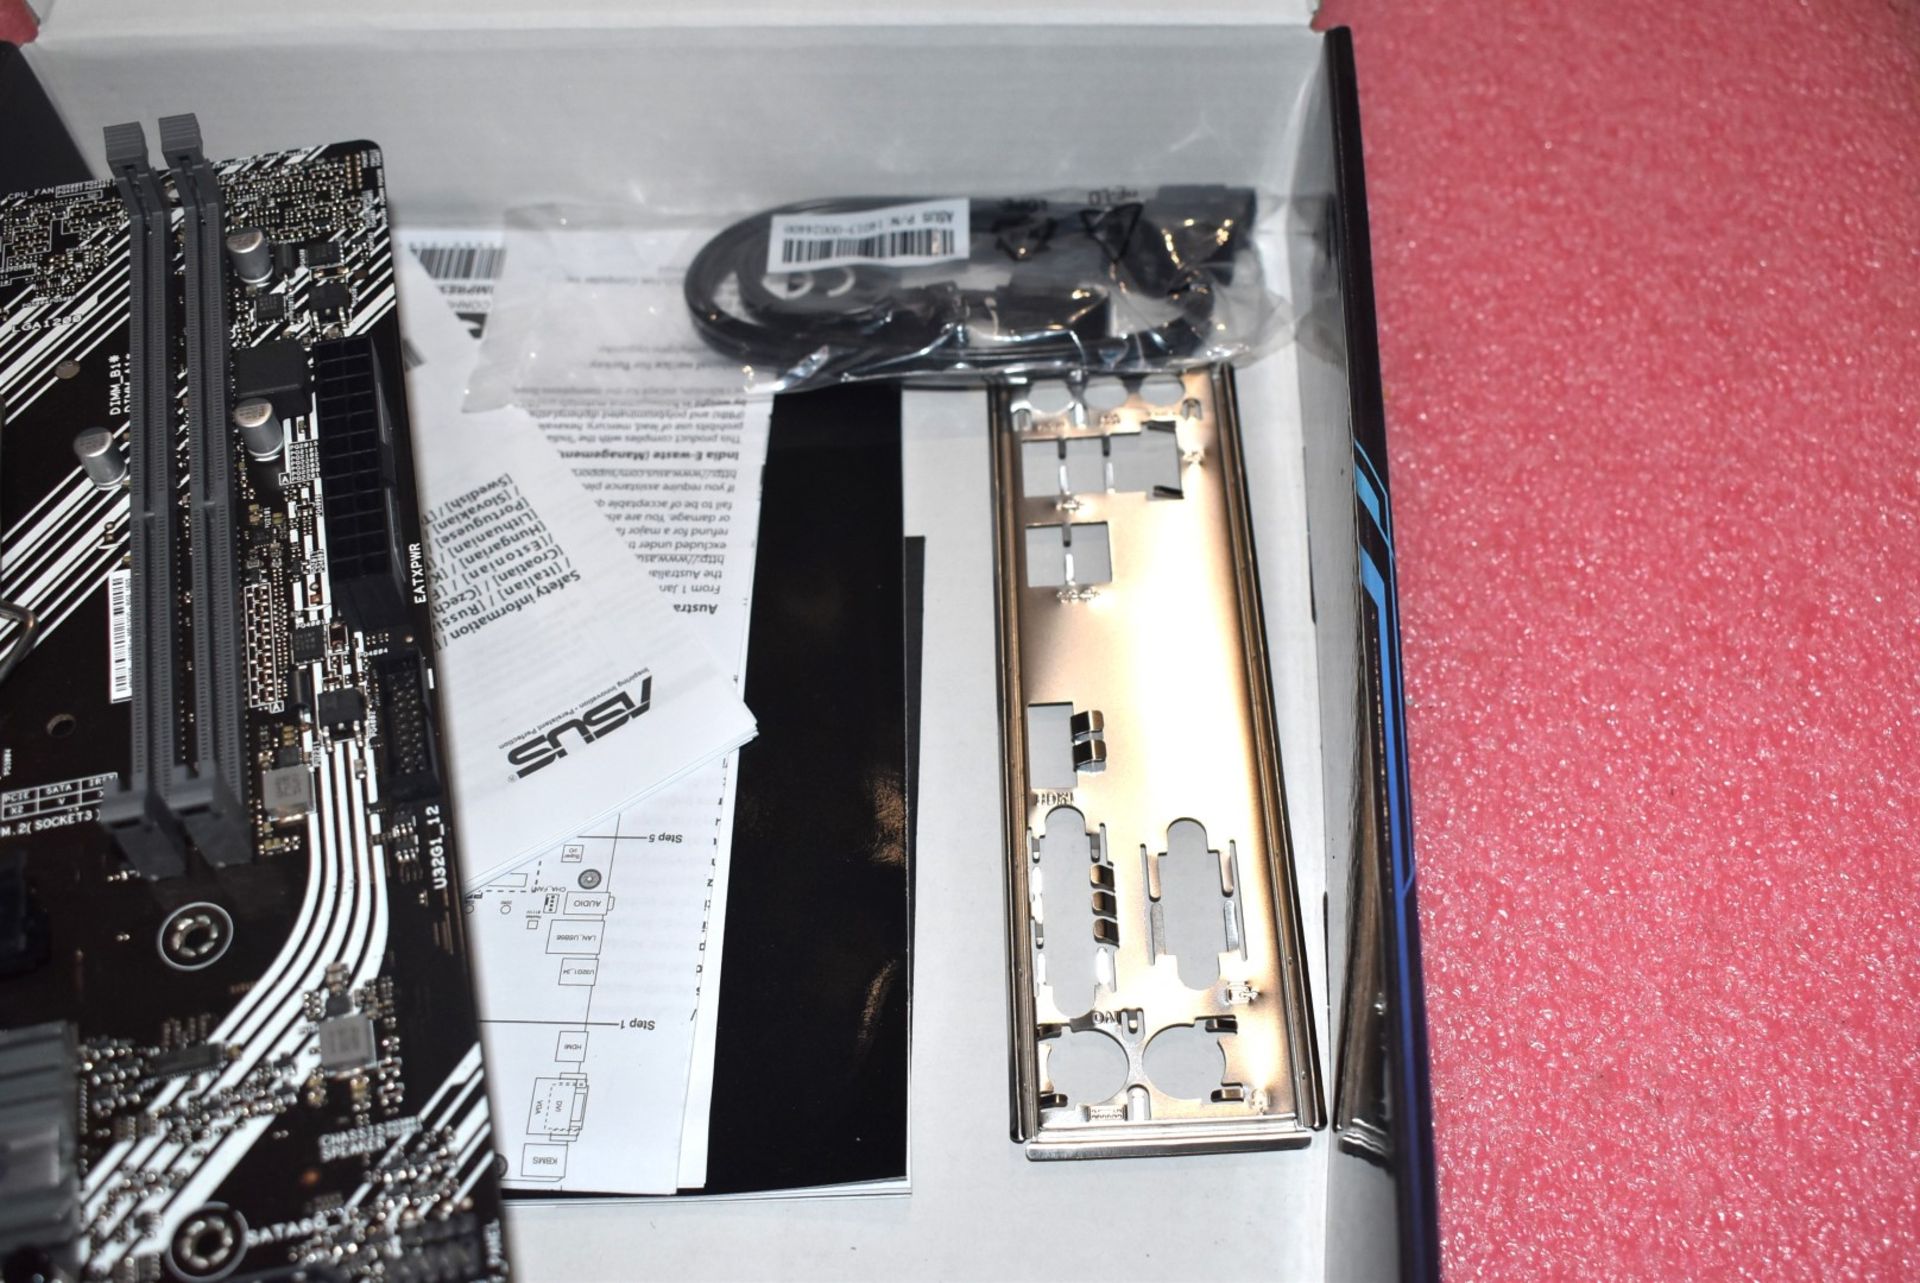 1 x Asus Prime H410M-E Intel LGA1200 Motherboard - Boxed With Accessories - Image 4 of 8